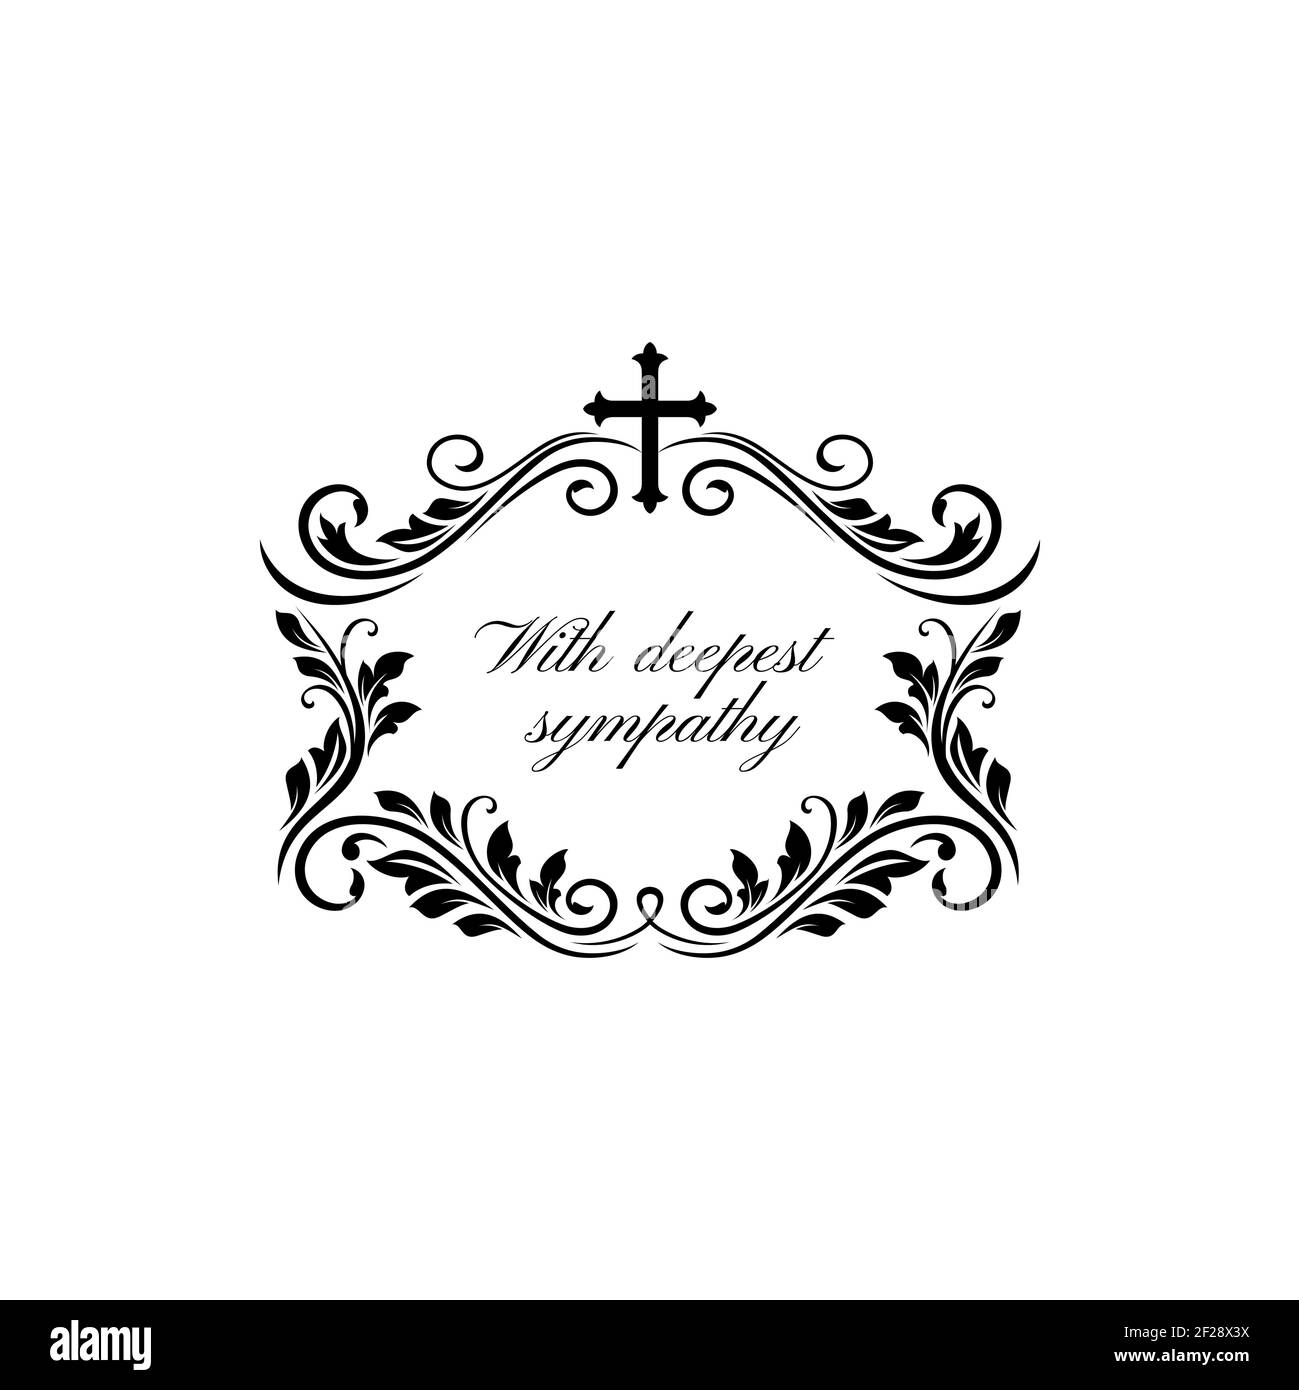 Obituary memorial lettering and floral ornament with cross isolated monochrome frame. Vector grief text with crucifix, flowers and leaves border, fune Stock Vector